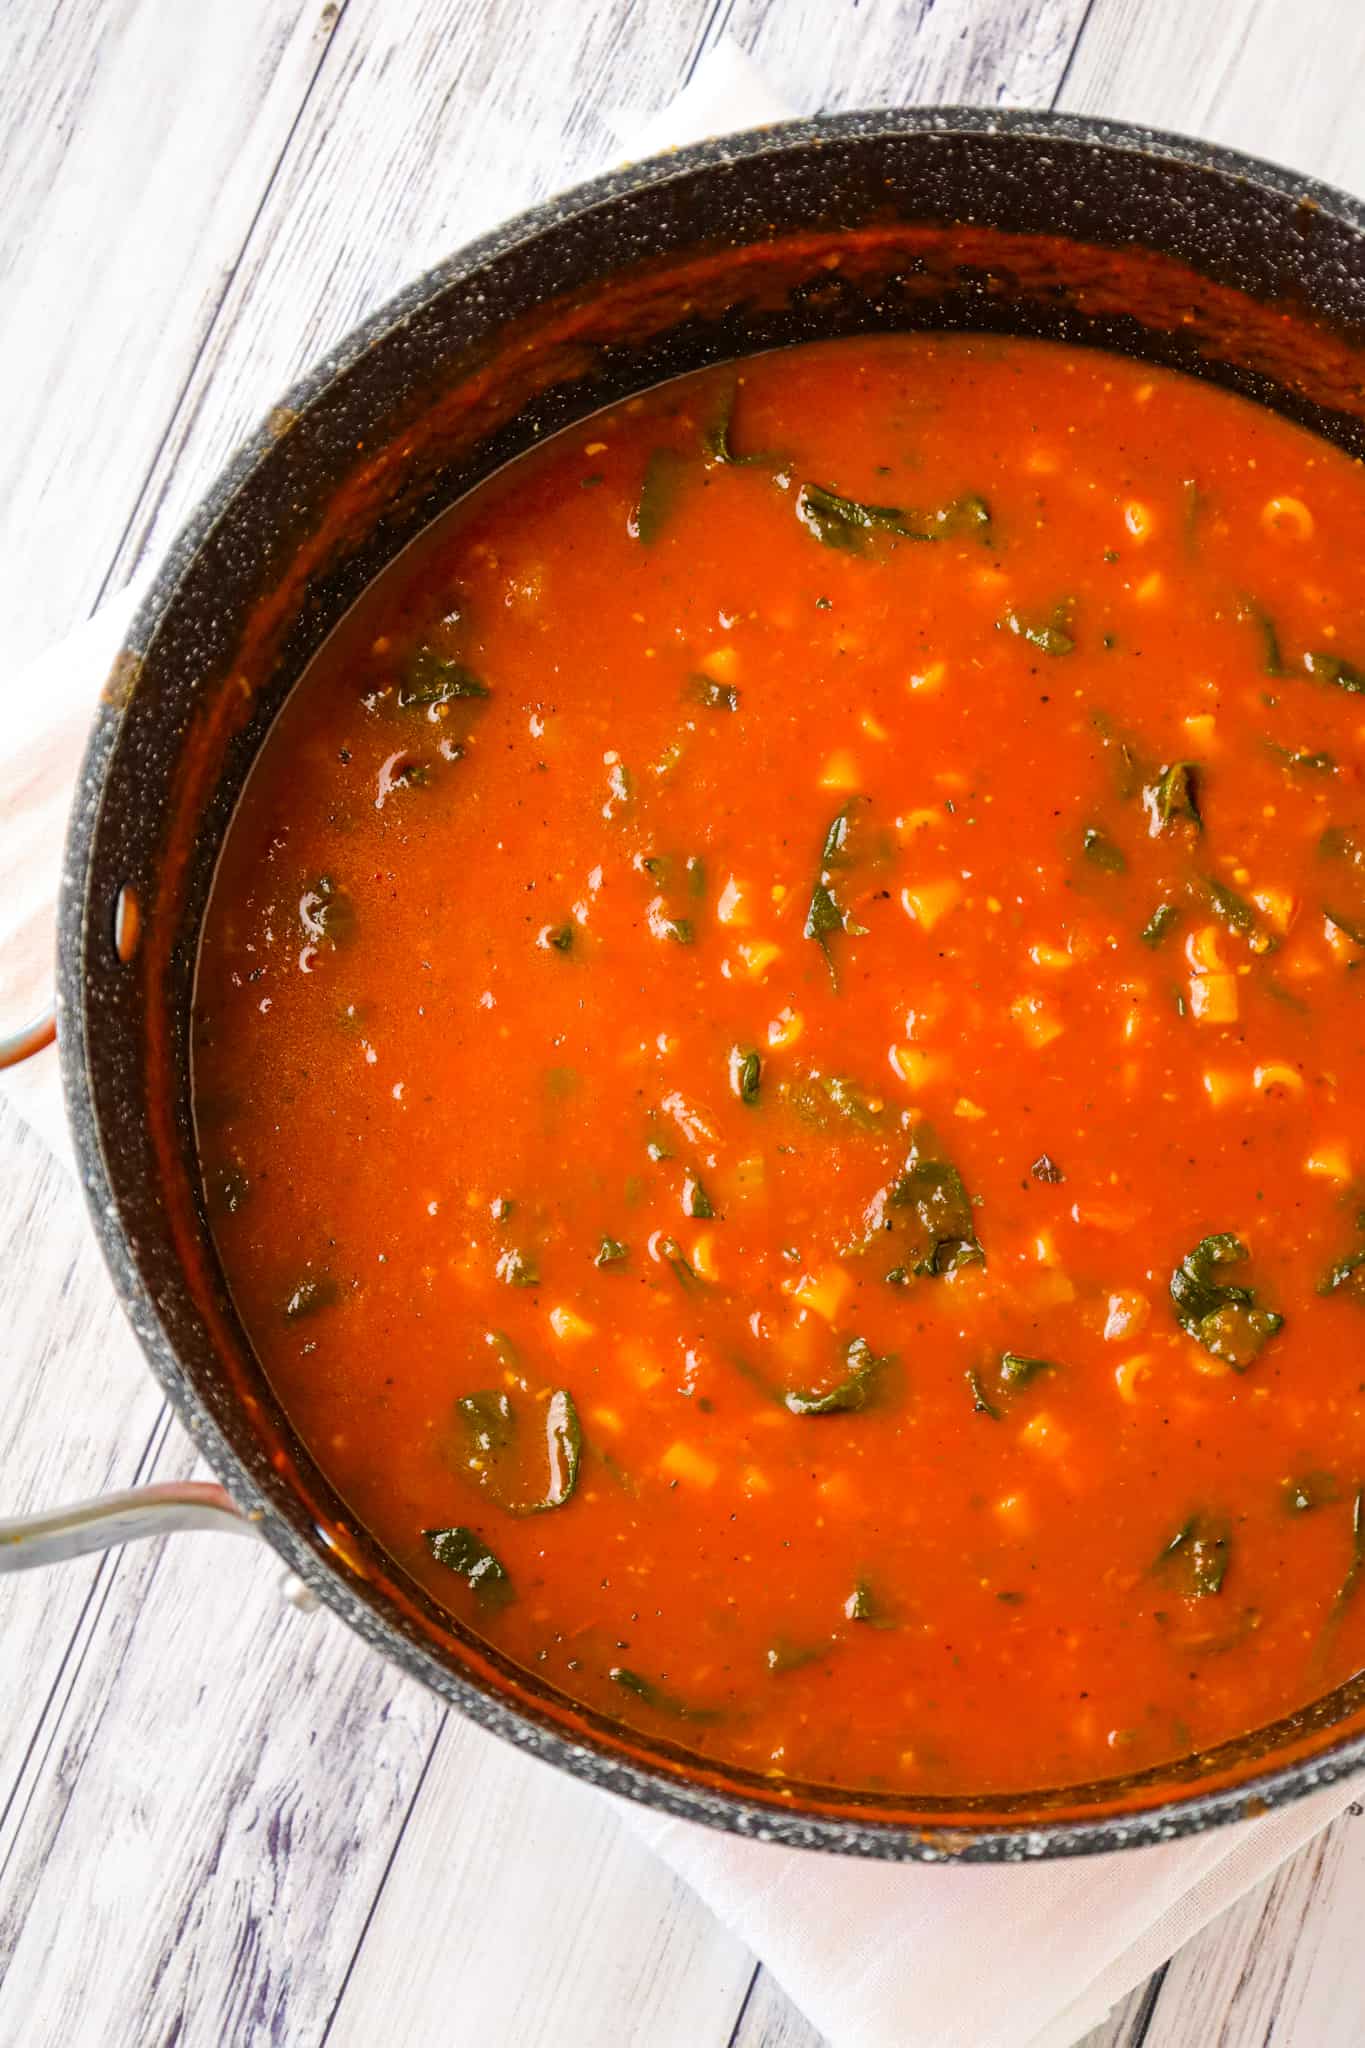 Tomato Florentine Soup is a hearty soup recipe made with crushed tomatoes and loaded with baby spinach and pasta.